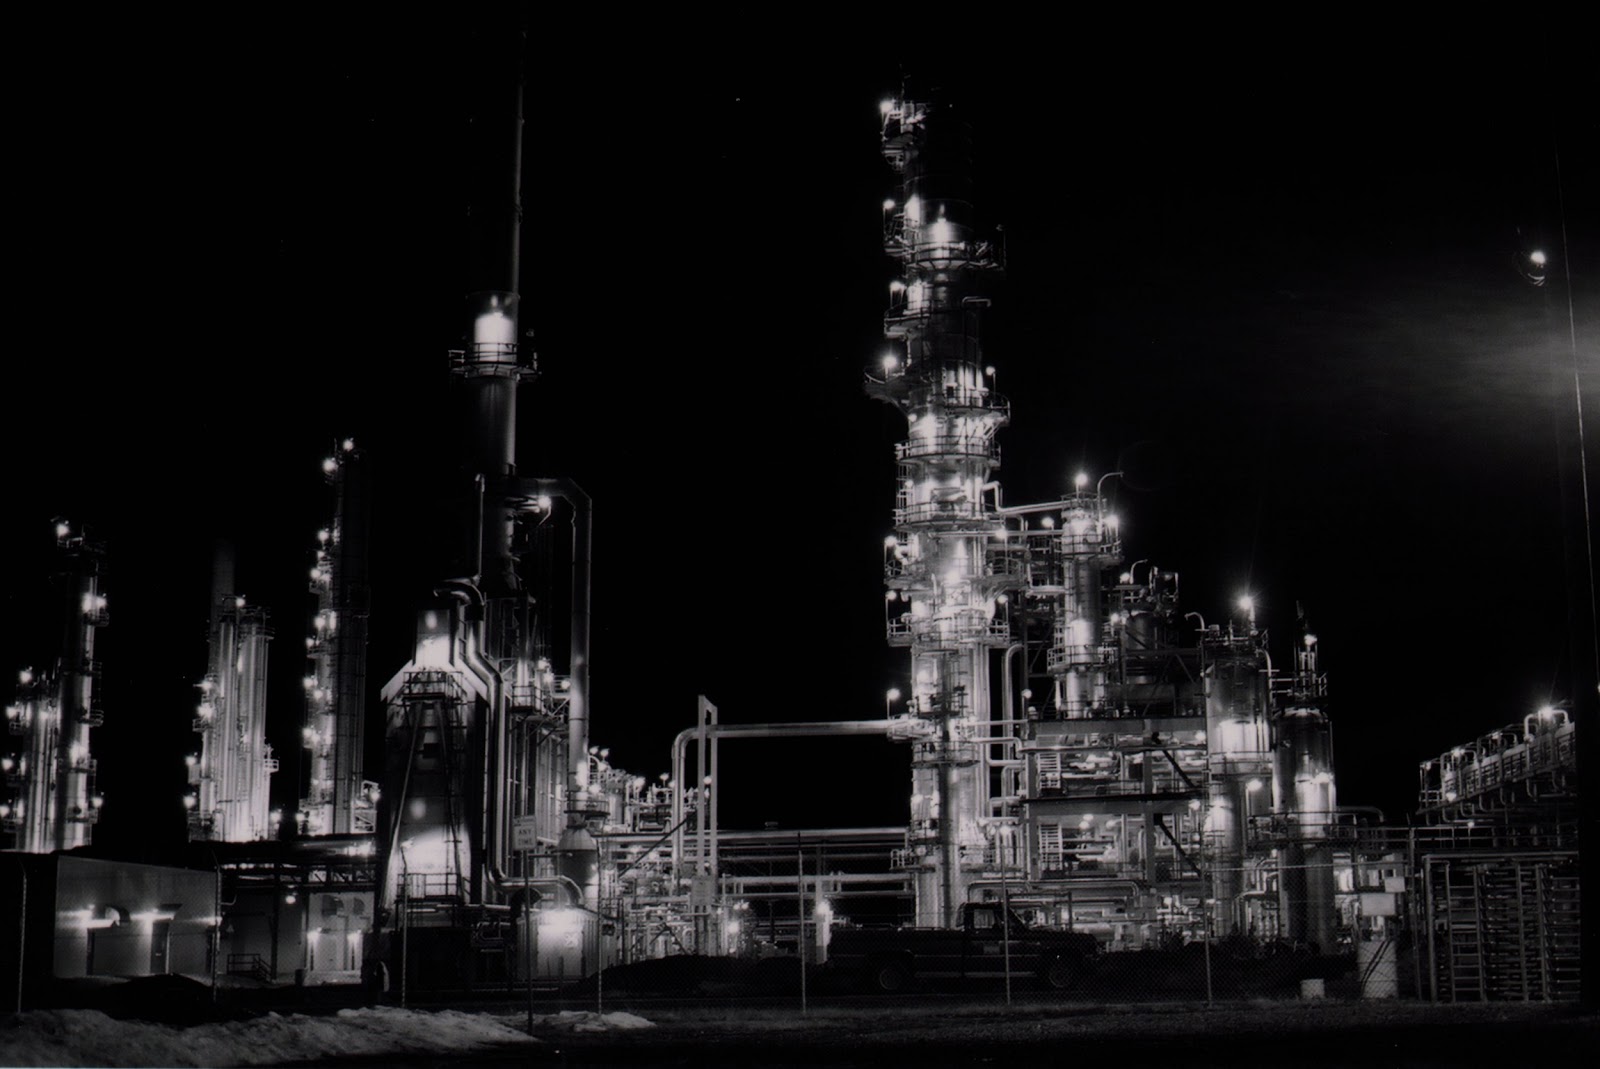 Black and white image of oil refinery